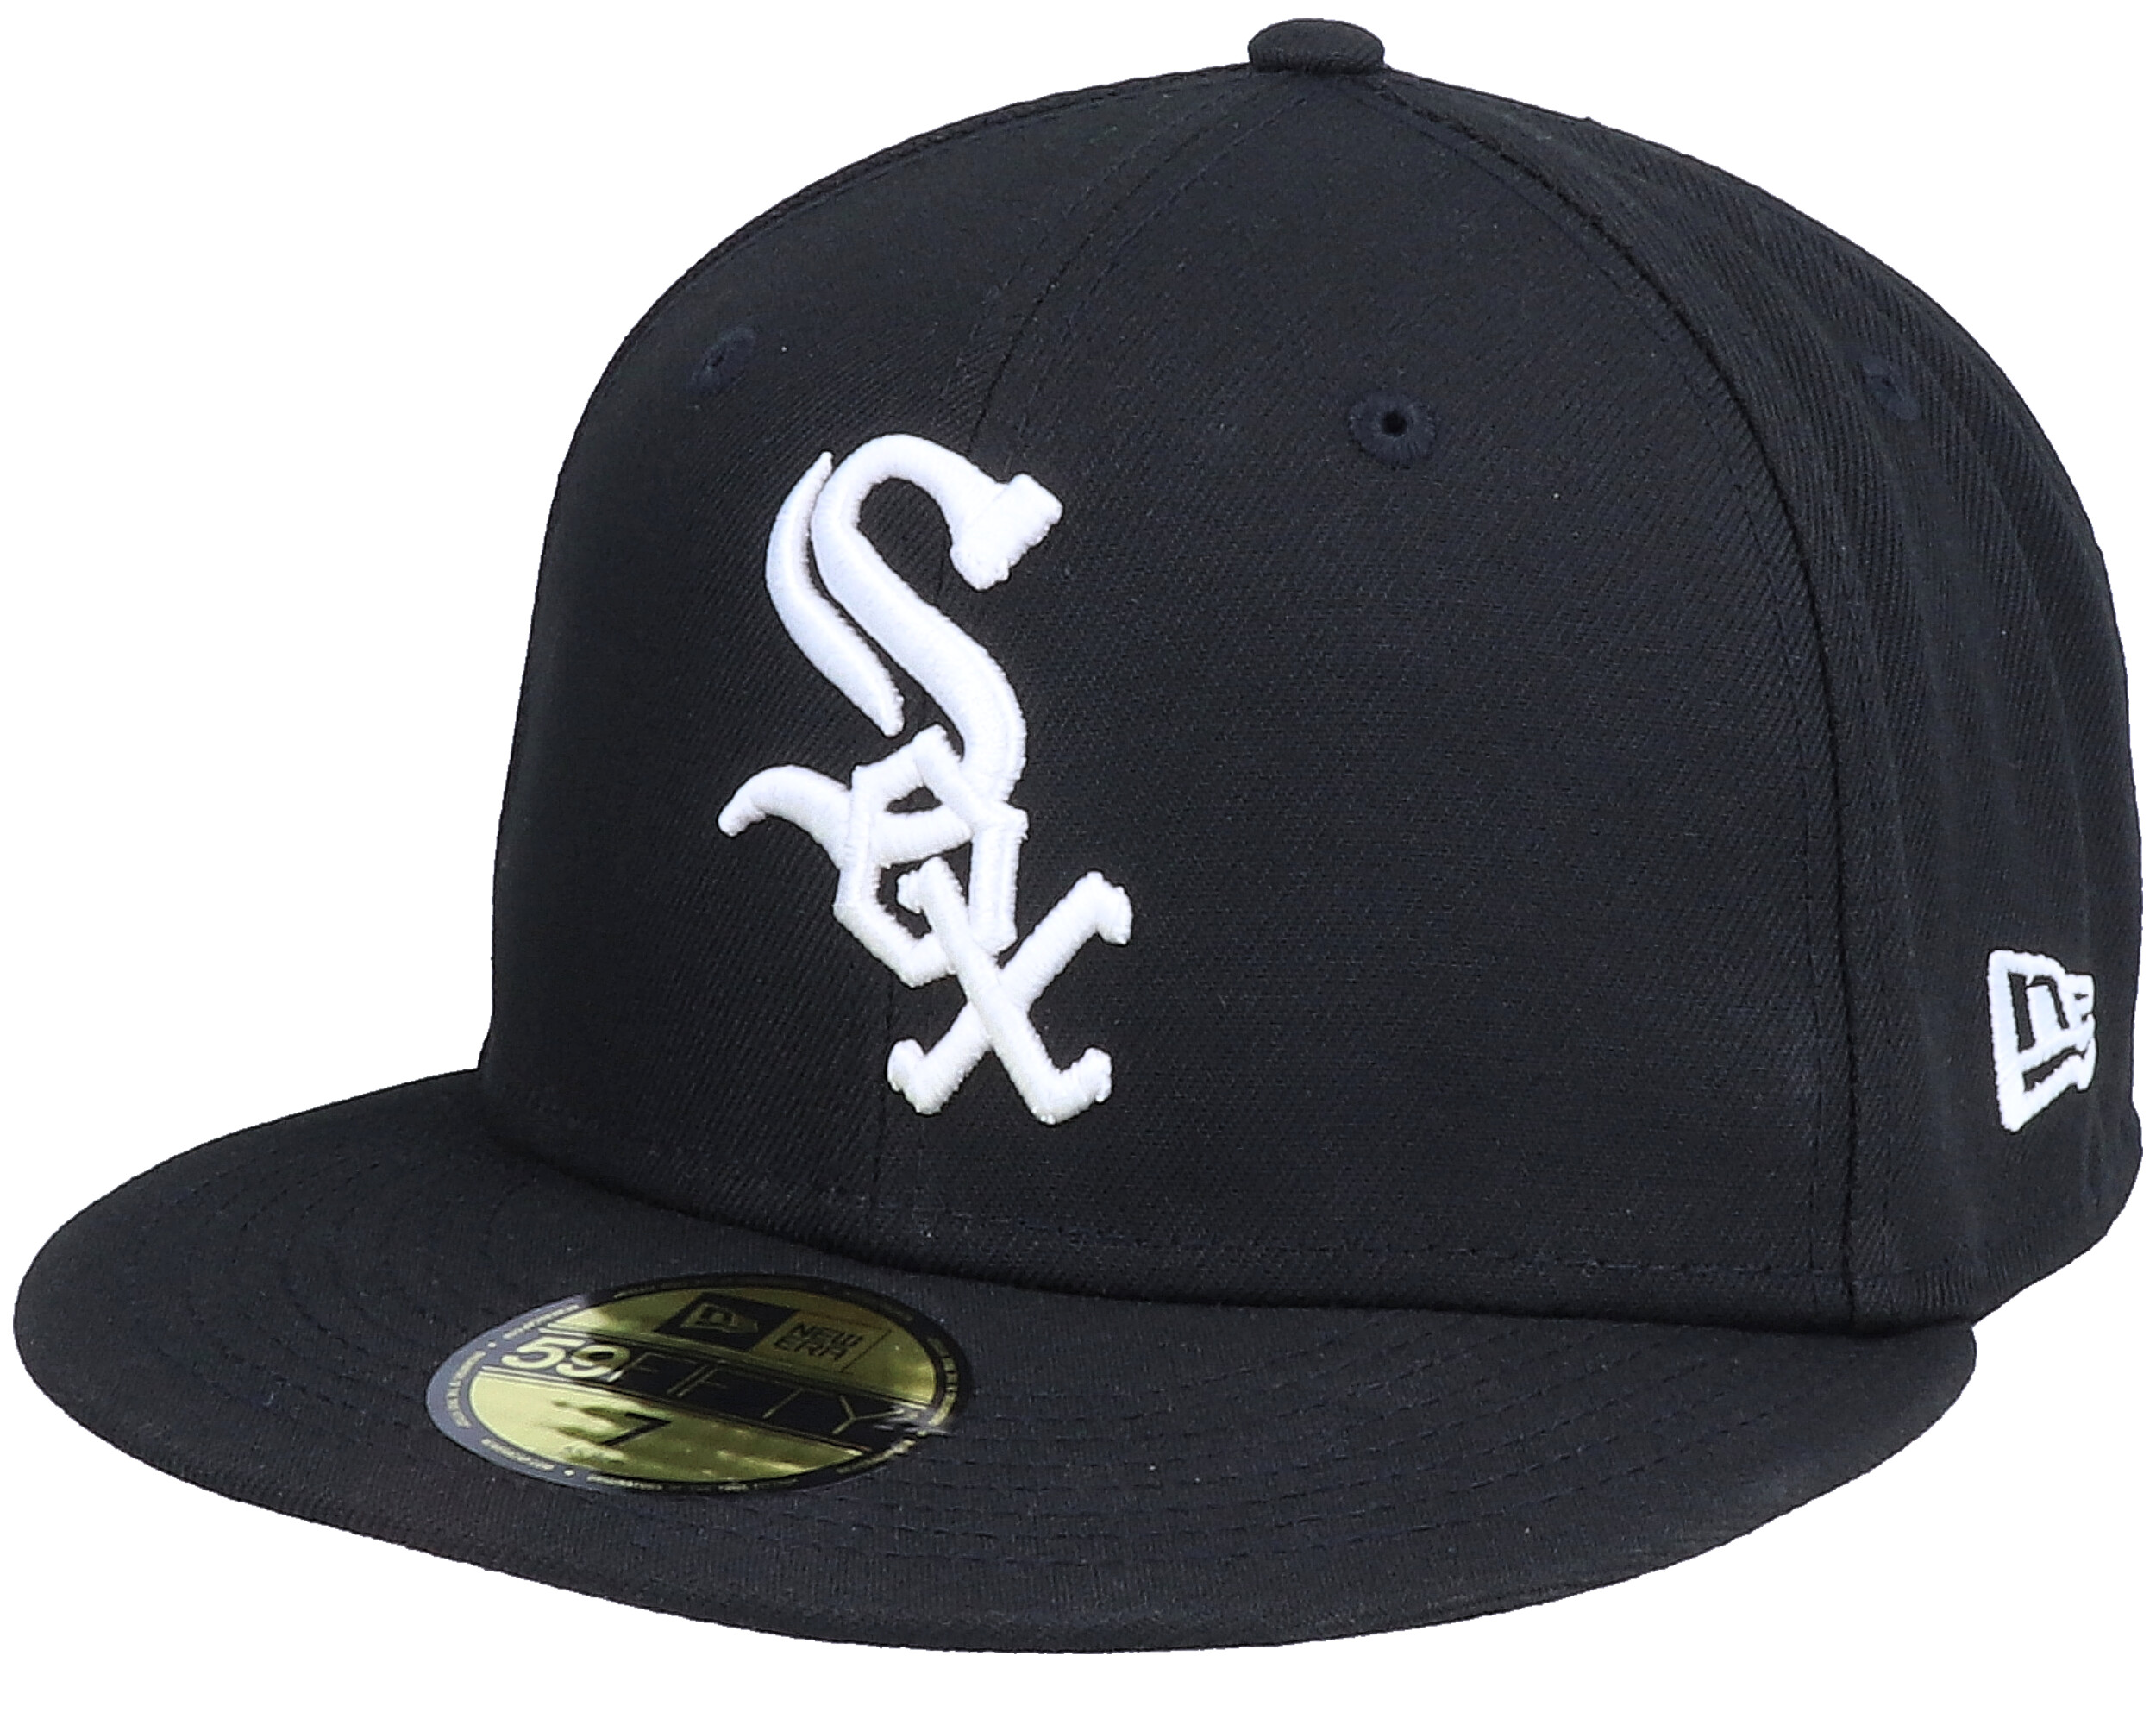 New Era - MLB Black fitted Cap - Chicago White Sox Authentic On-Field 59Fifty Black Fitted @ Hatstore